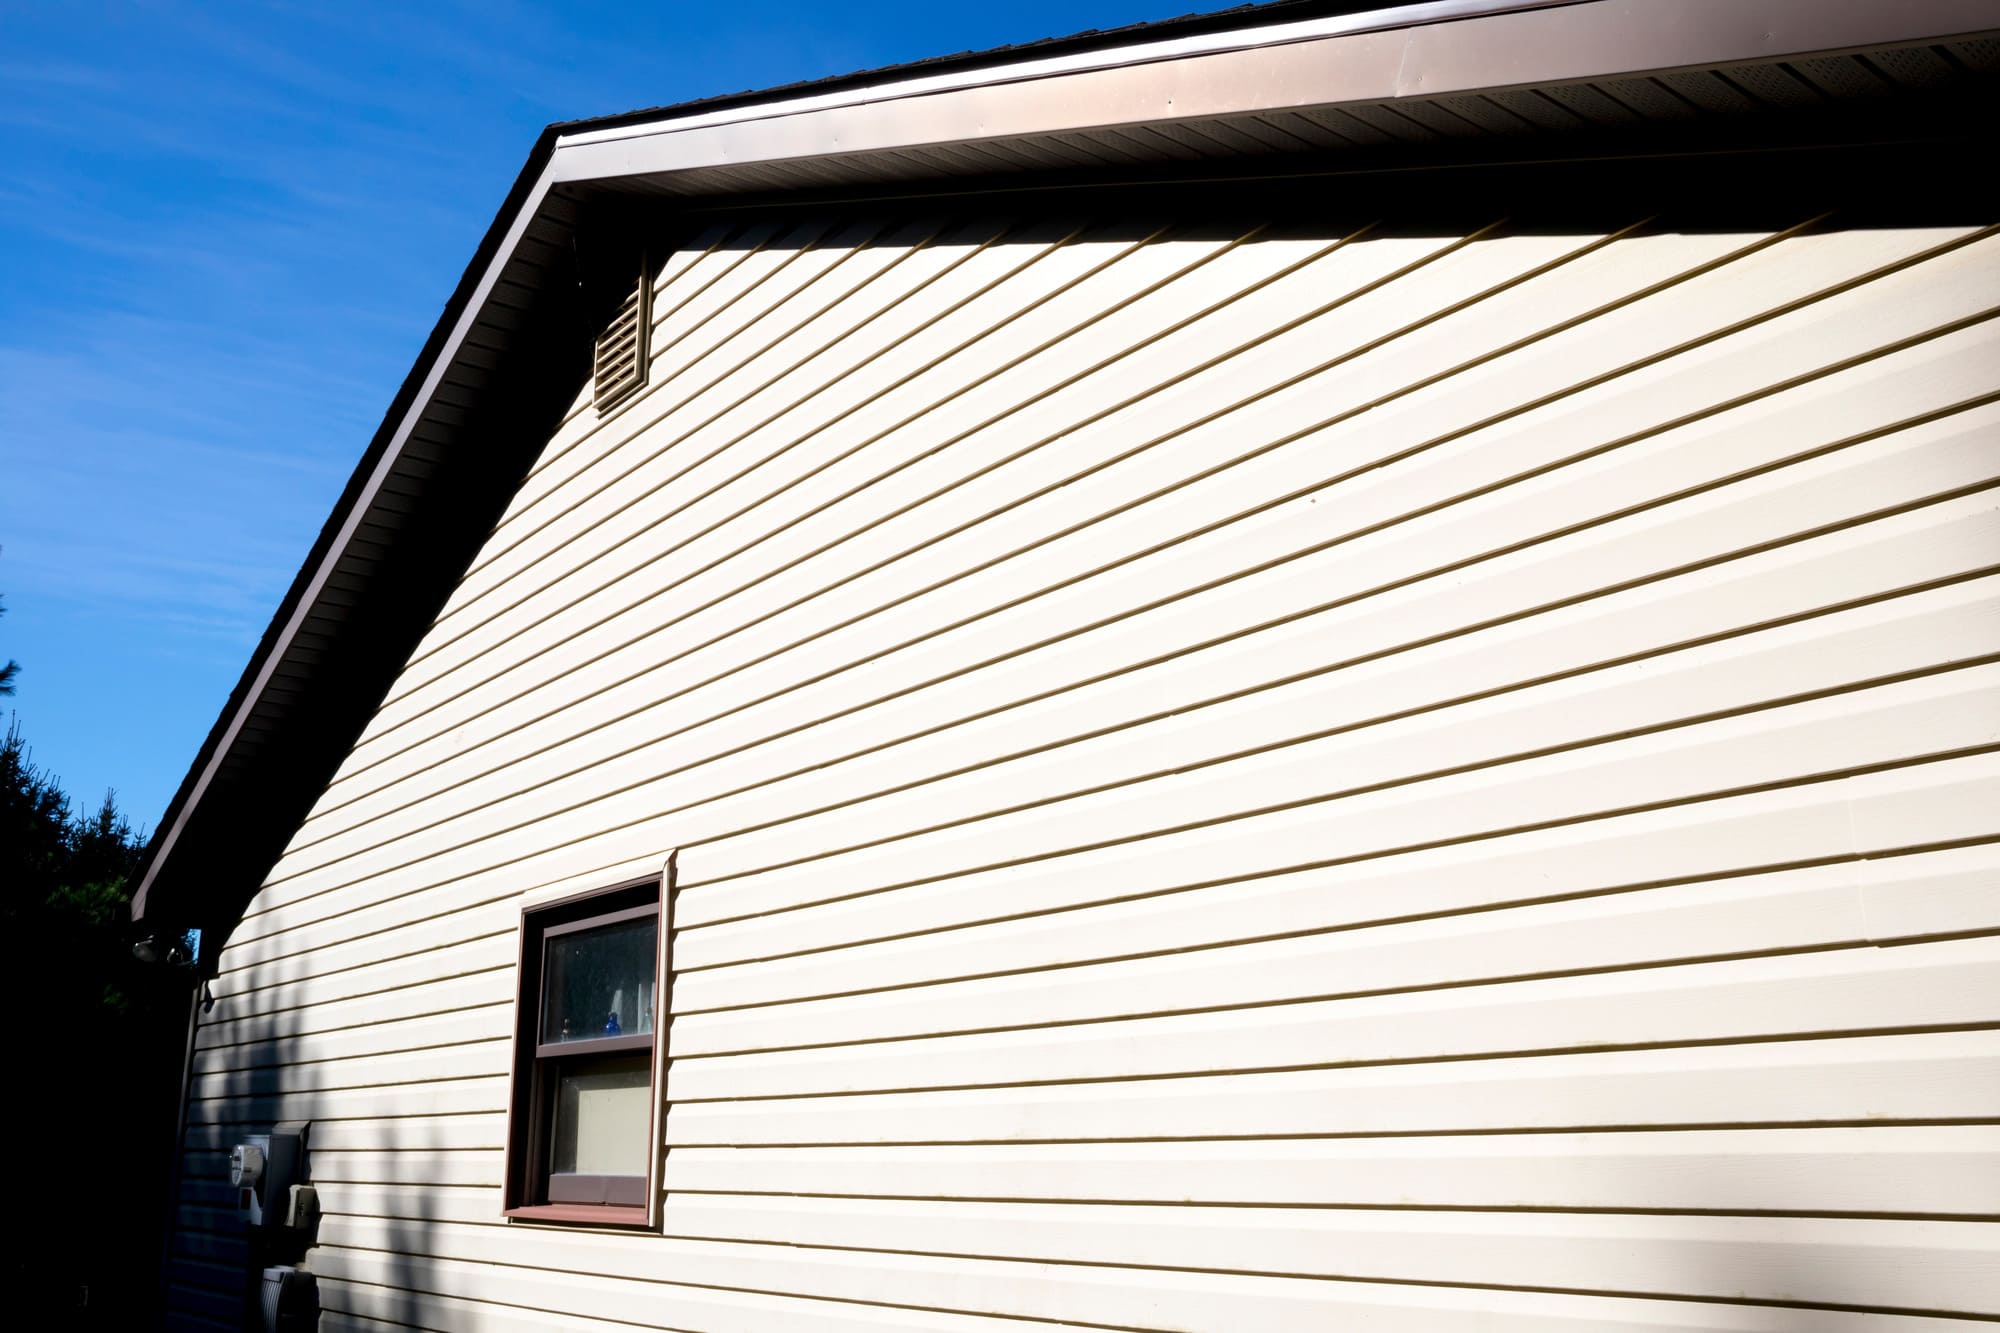 How can I best prepare my home for a siding replacement?